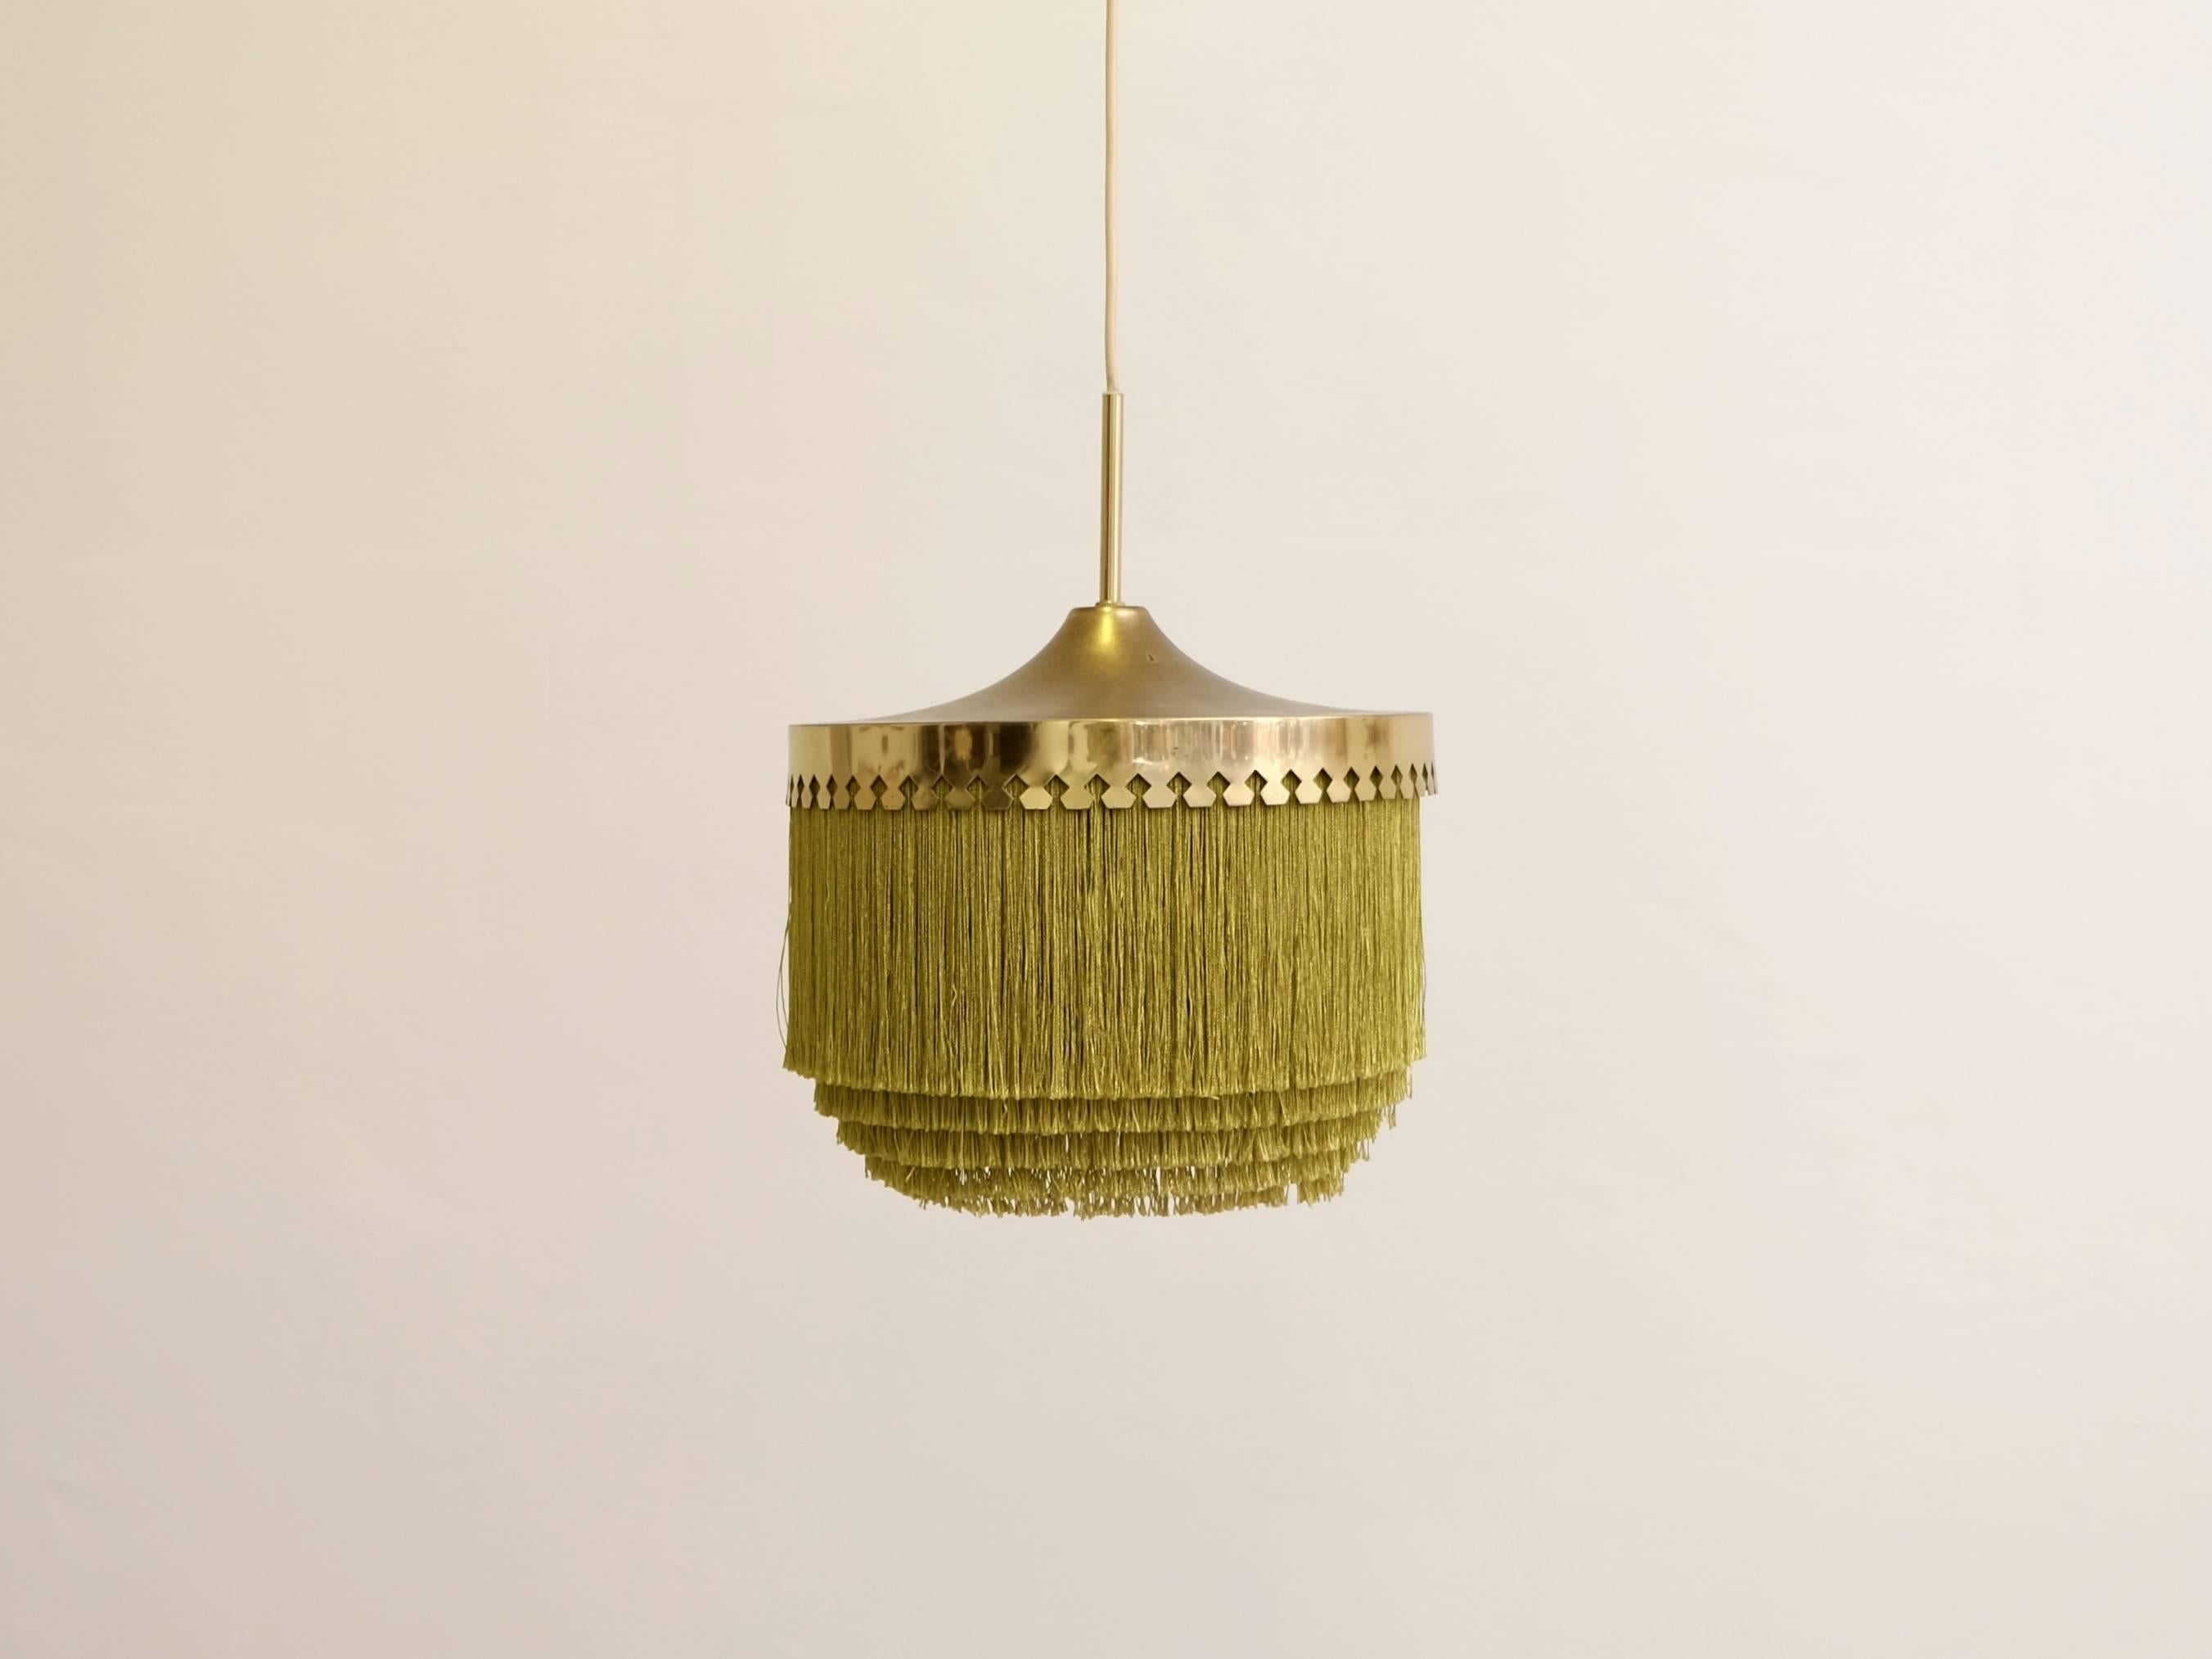 Olive green fringes and patinated brass.
Produced by Hans-Agne Jakobsson, Markaryd, Sweden, 1960s.
Height is adjustable.